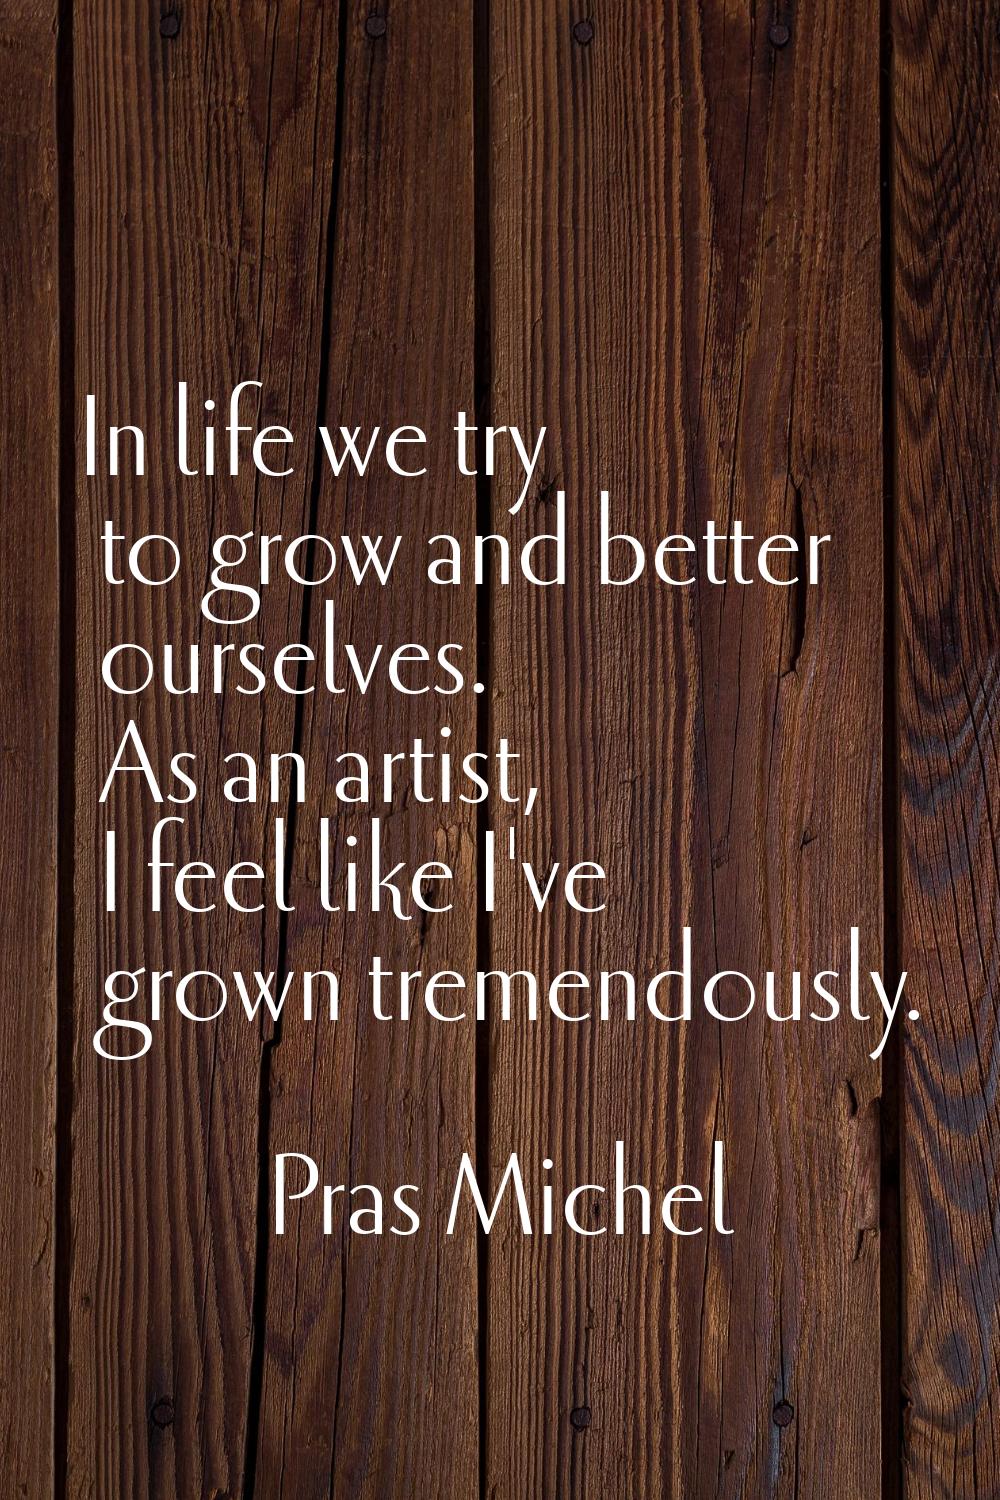 In life we try to grow and better ourselves. As an artist, I feel like I've grown tremendously.